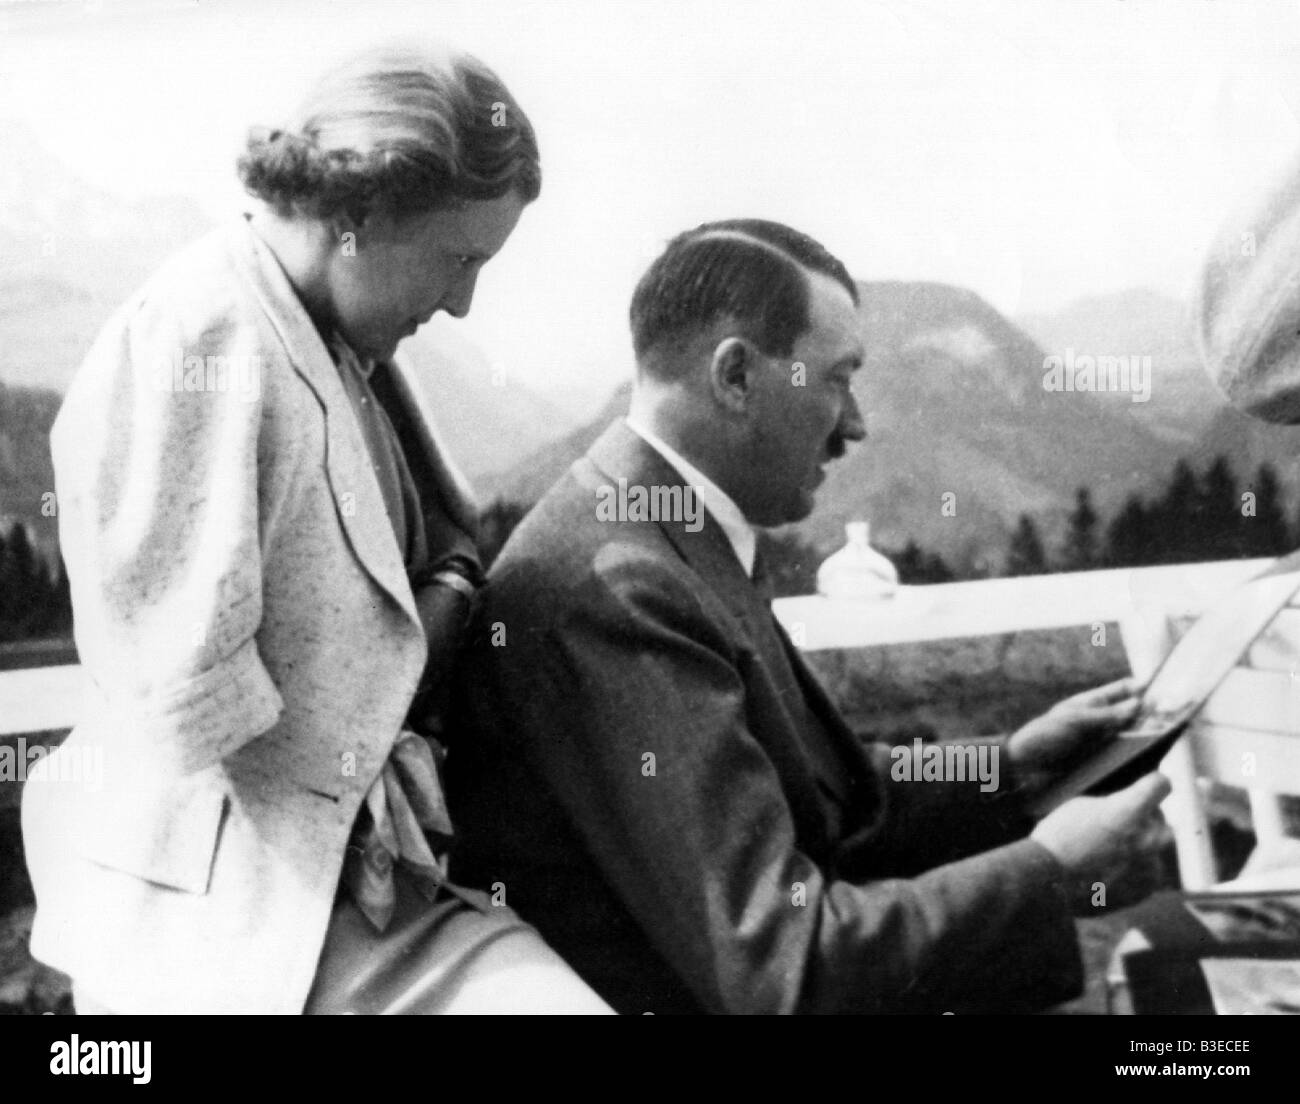 Hitler, Adolf, 20.4.1889 - 30.4.1945, German politician (NSDAP) Chancellor since 30.1.1933, private, together with Eva Braun at Berghof, Obersalzberg, 1930s, National Socialism, Stock Photo